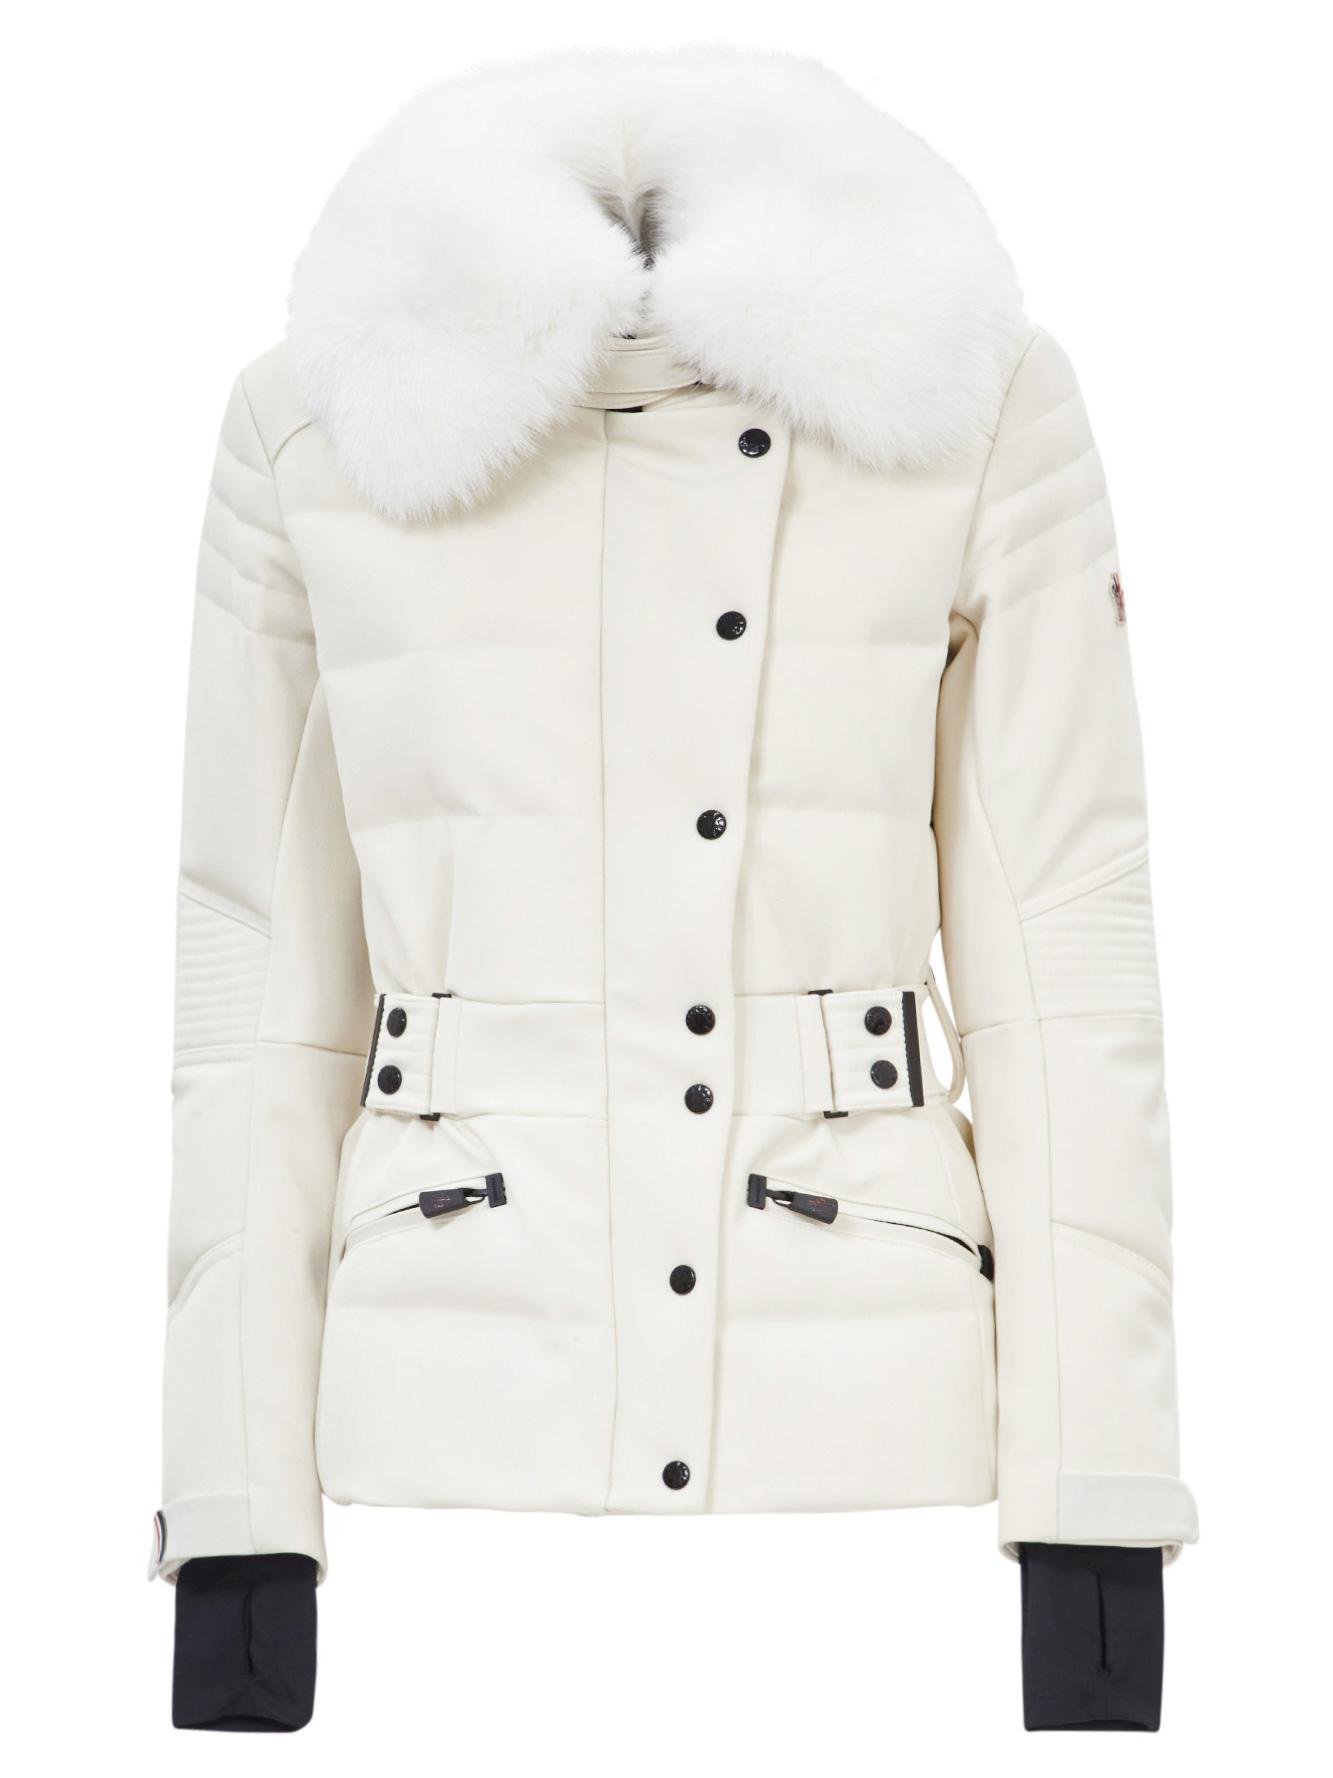 3 MONCLER GRENOBLE Fur Collar Quilted Jacket in White - Lyst